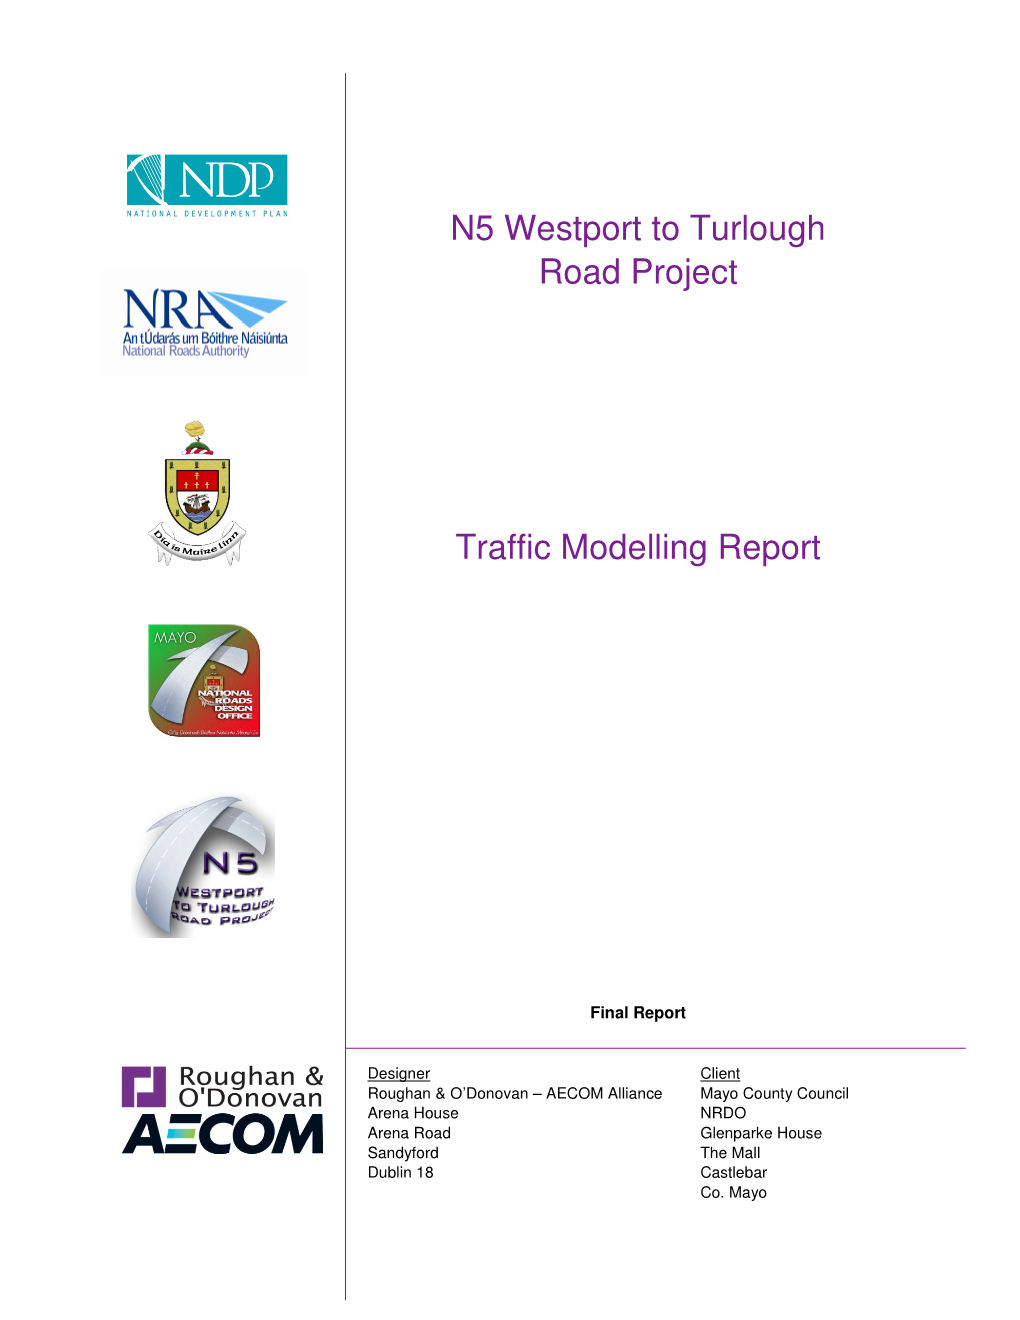 N5 Westport to Turlough Road Project Traffic Modelling Report